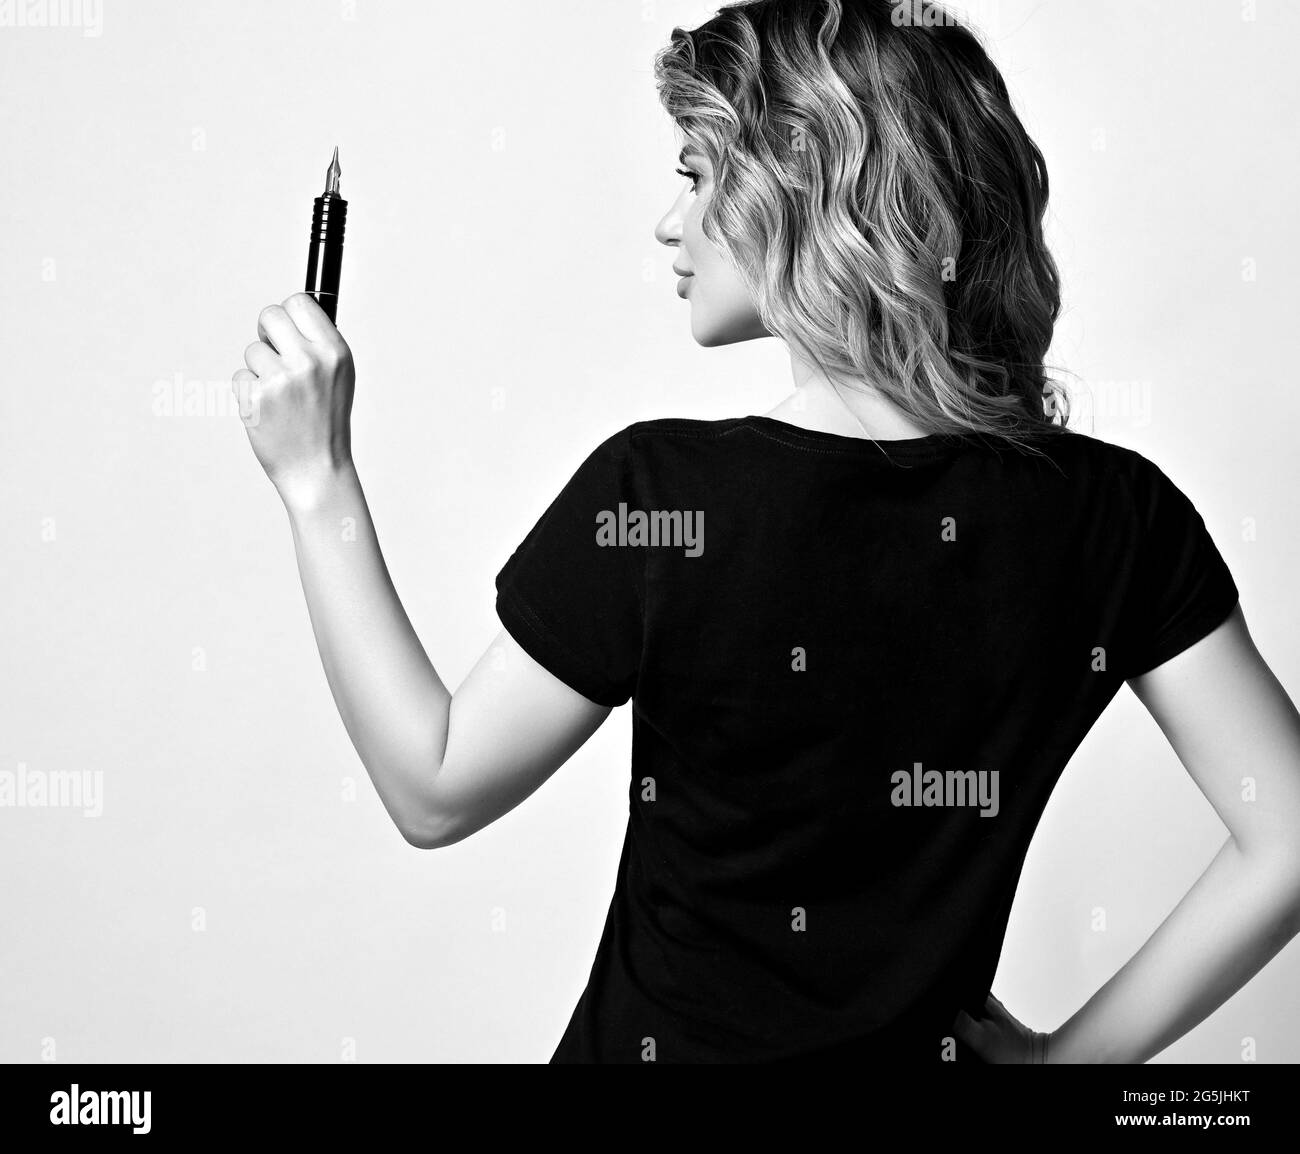 Black and white. Curly woman in black t-shirt stands with her back to camera holding permanent makeup machine Stock Photo